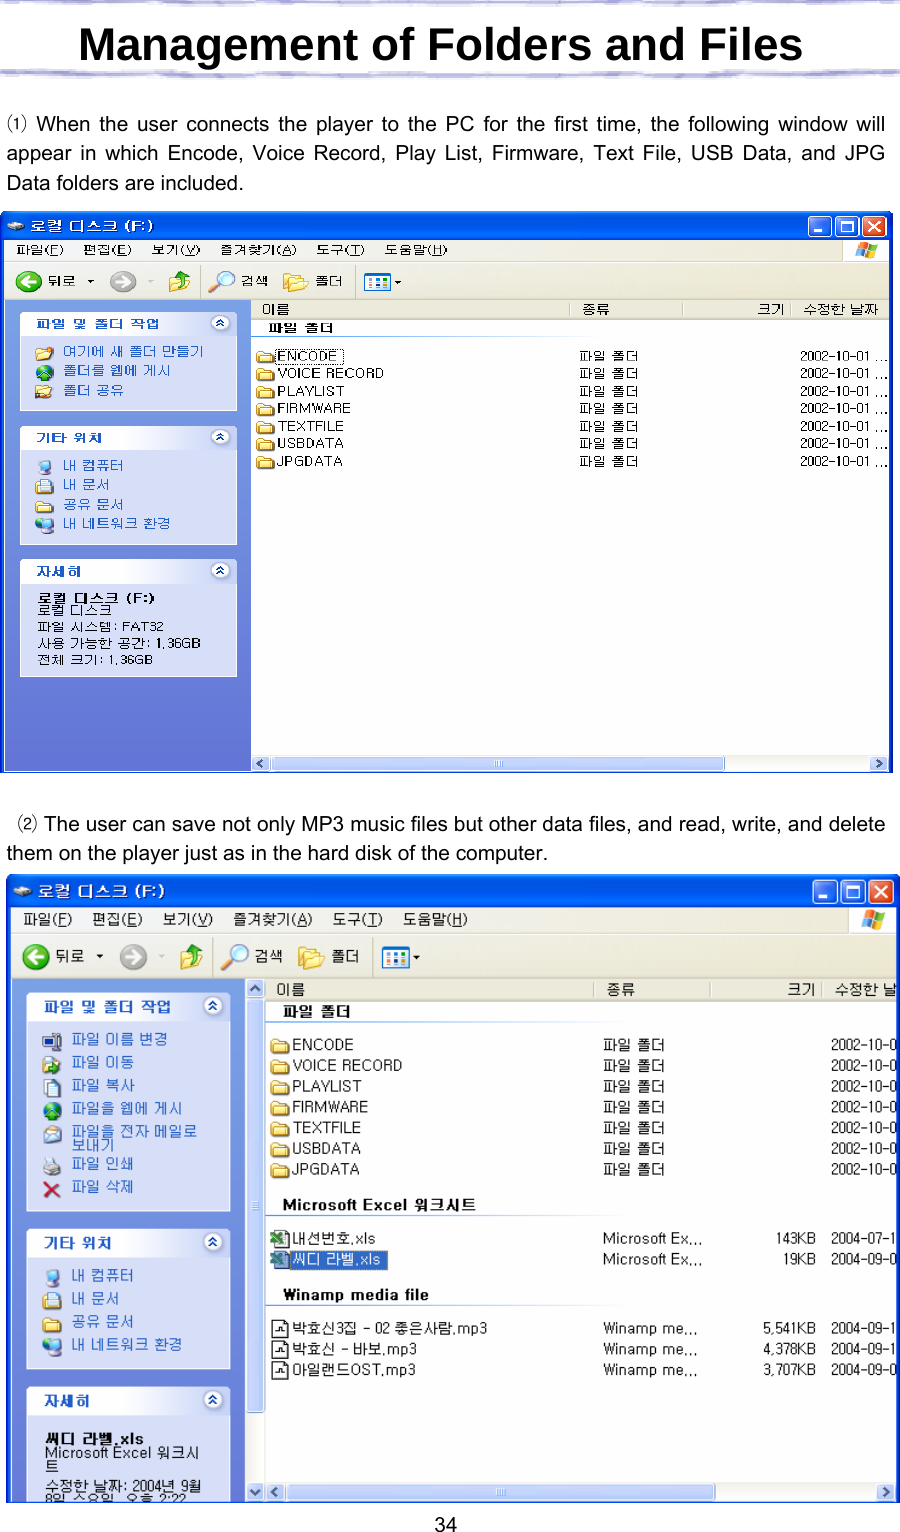  34     ⑴When the user connects the player to the PC for the first time, the following window will appear in which Encode, Voice Record, Play List, Firmware, Text File, USB Data, and JPG Data folders are included.                        ⑵The user can save not only MP3 music files but other data files, and read, write, and delete them on the player just as in the hard disk of the computer.   Management of Folders and Files 